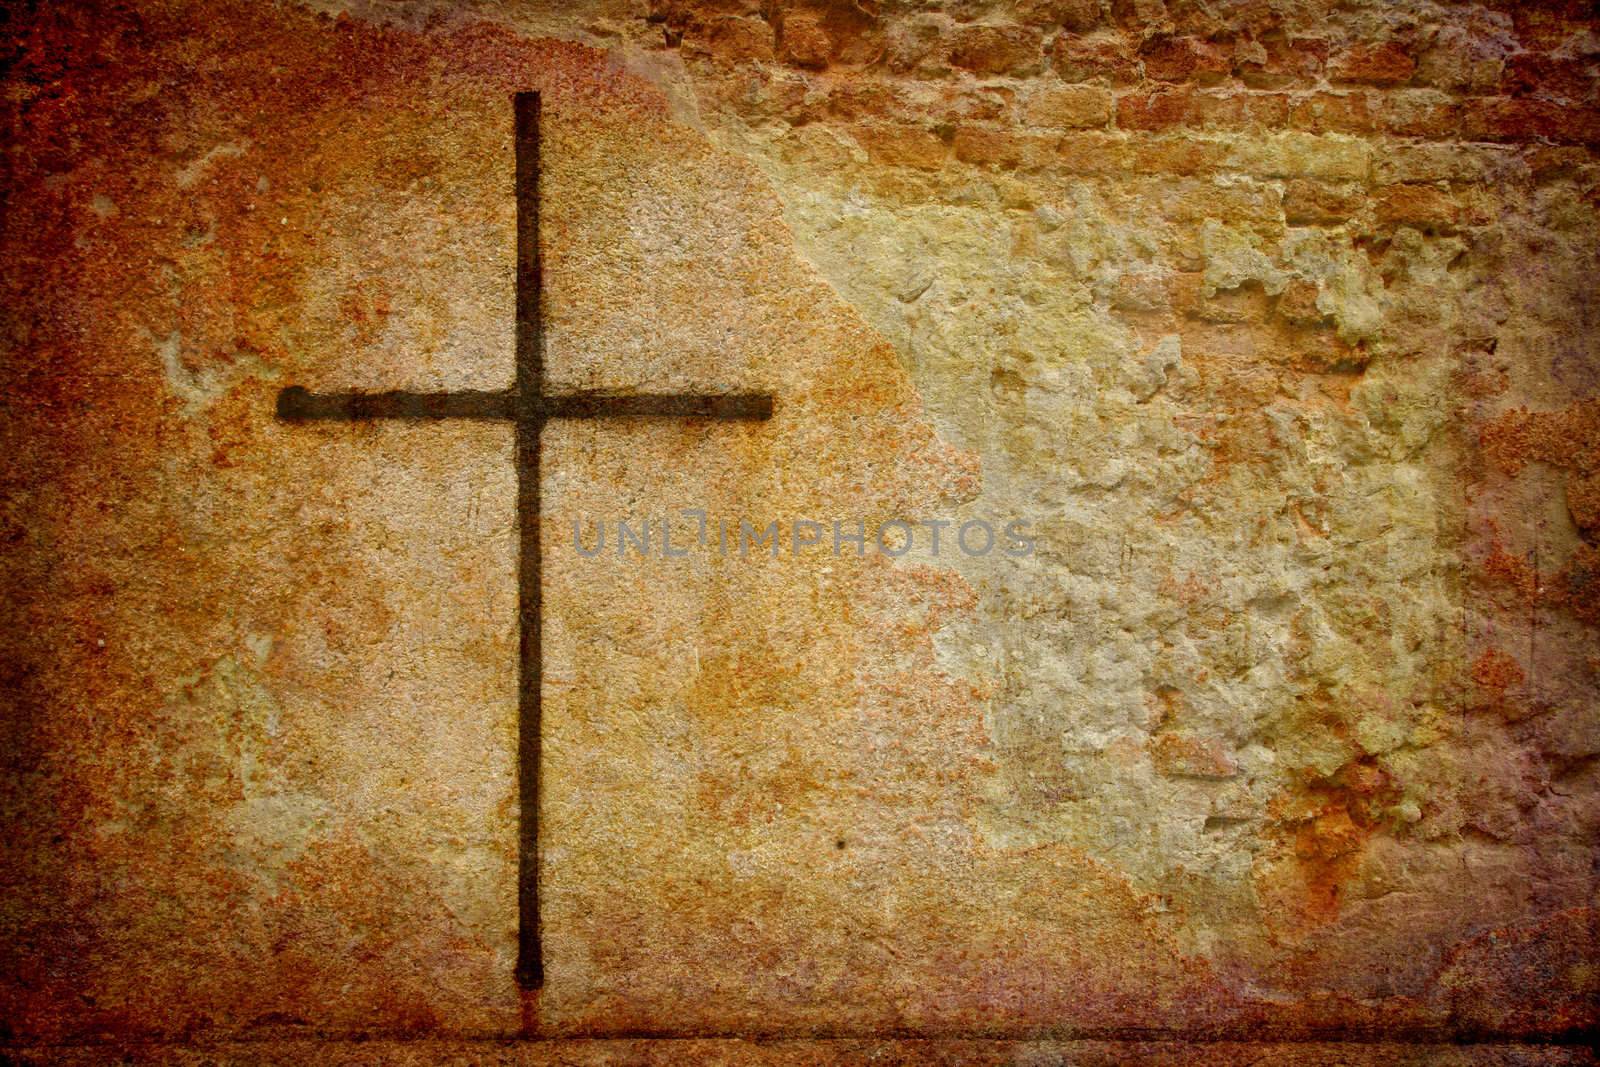 Cross on grunge wall by ABCDK